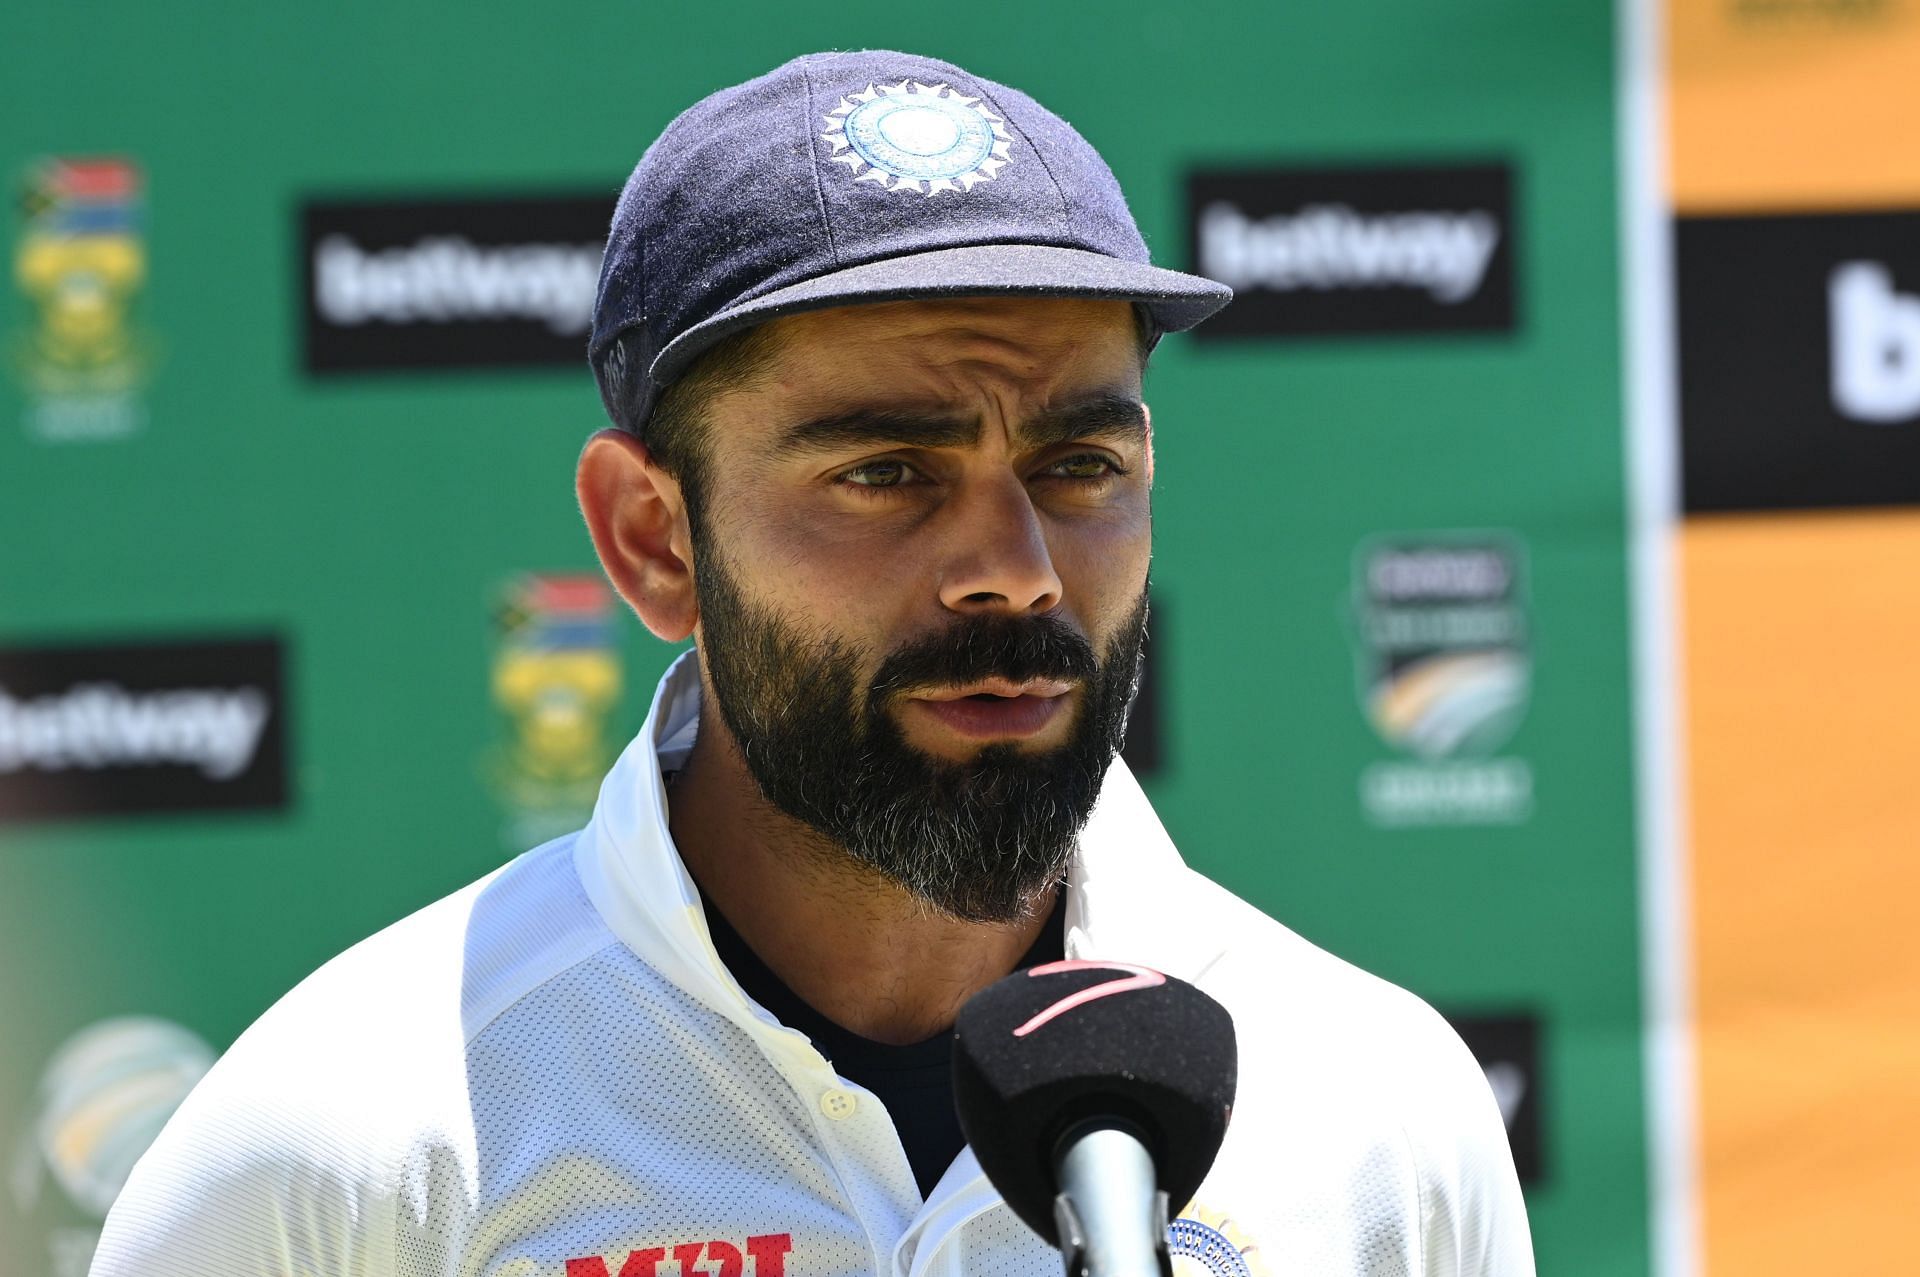 Virat Kohli was ruled out of the second Test due to an injury